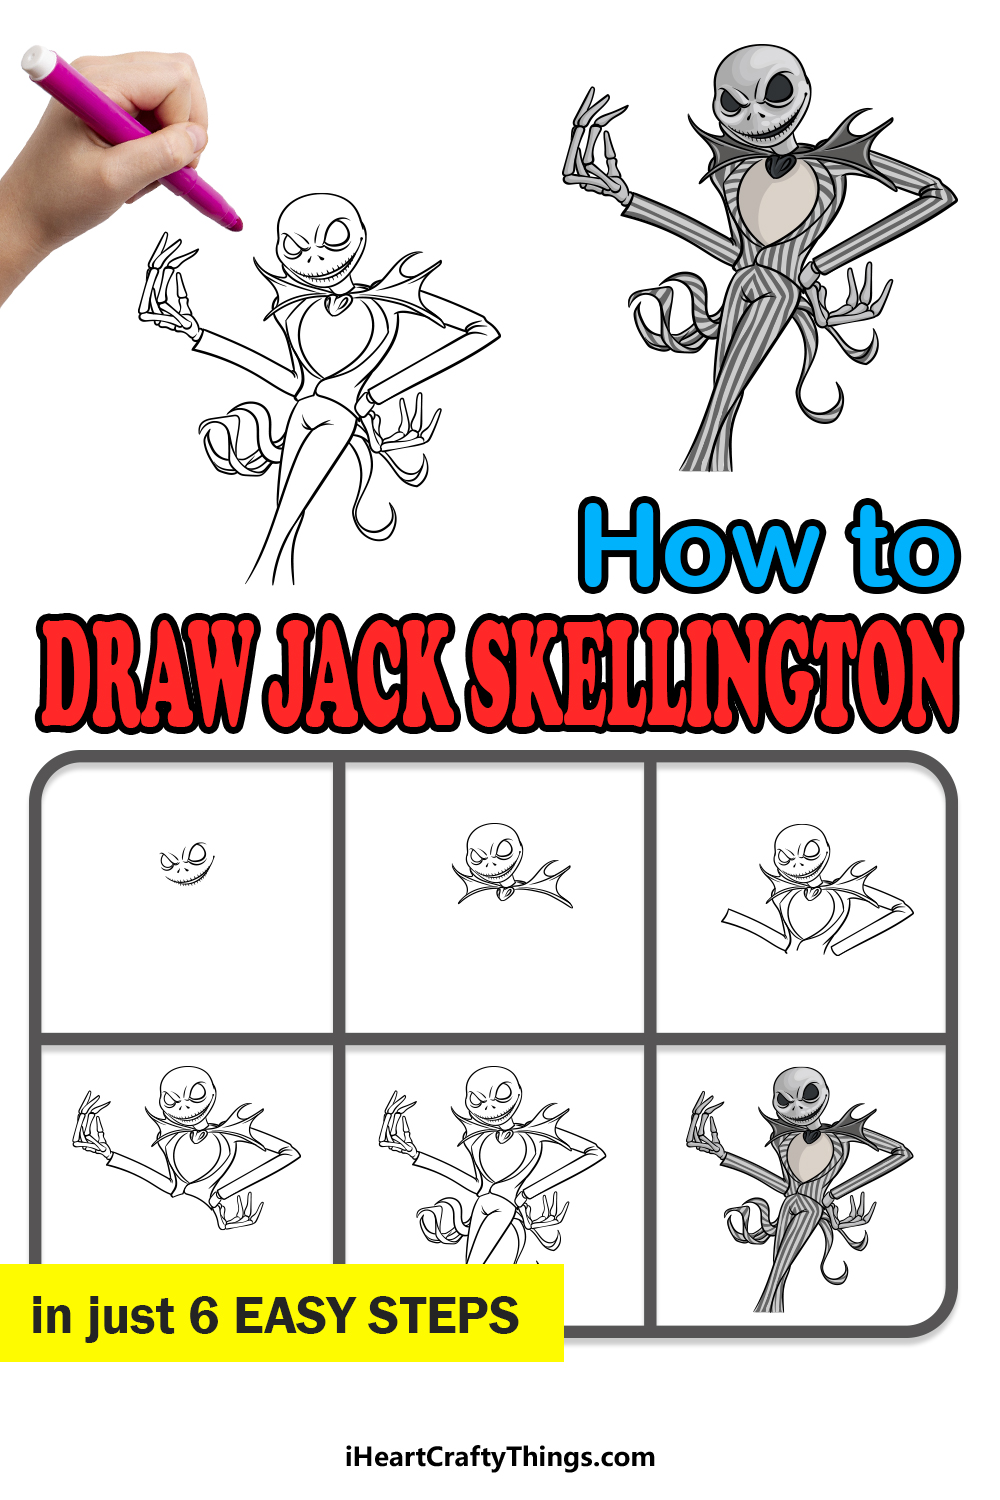 how to draw Jack Skellington in 6 easy steps